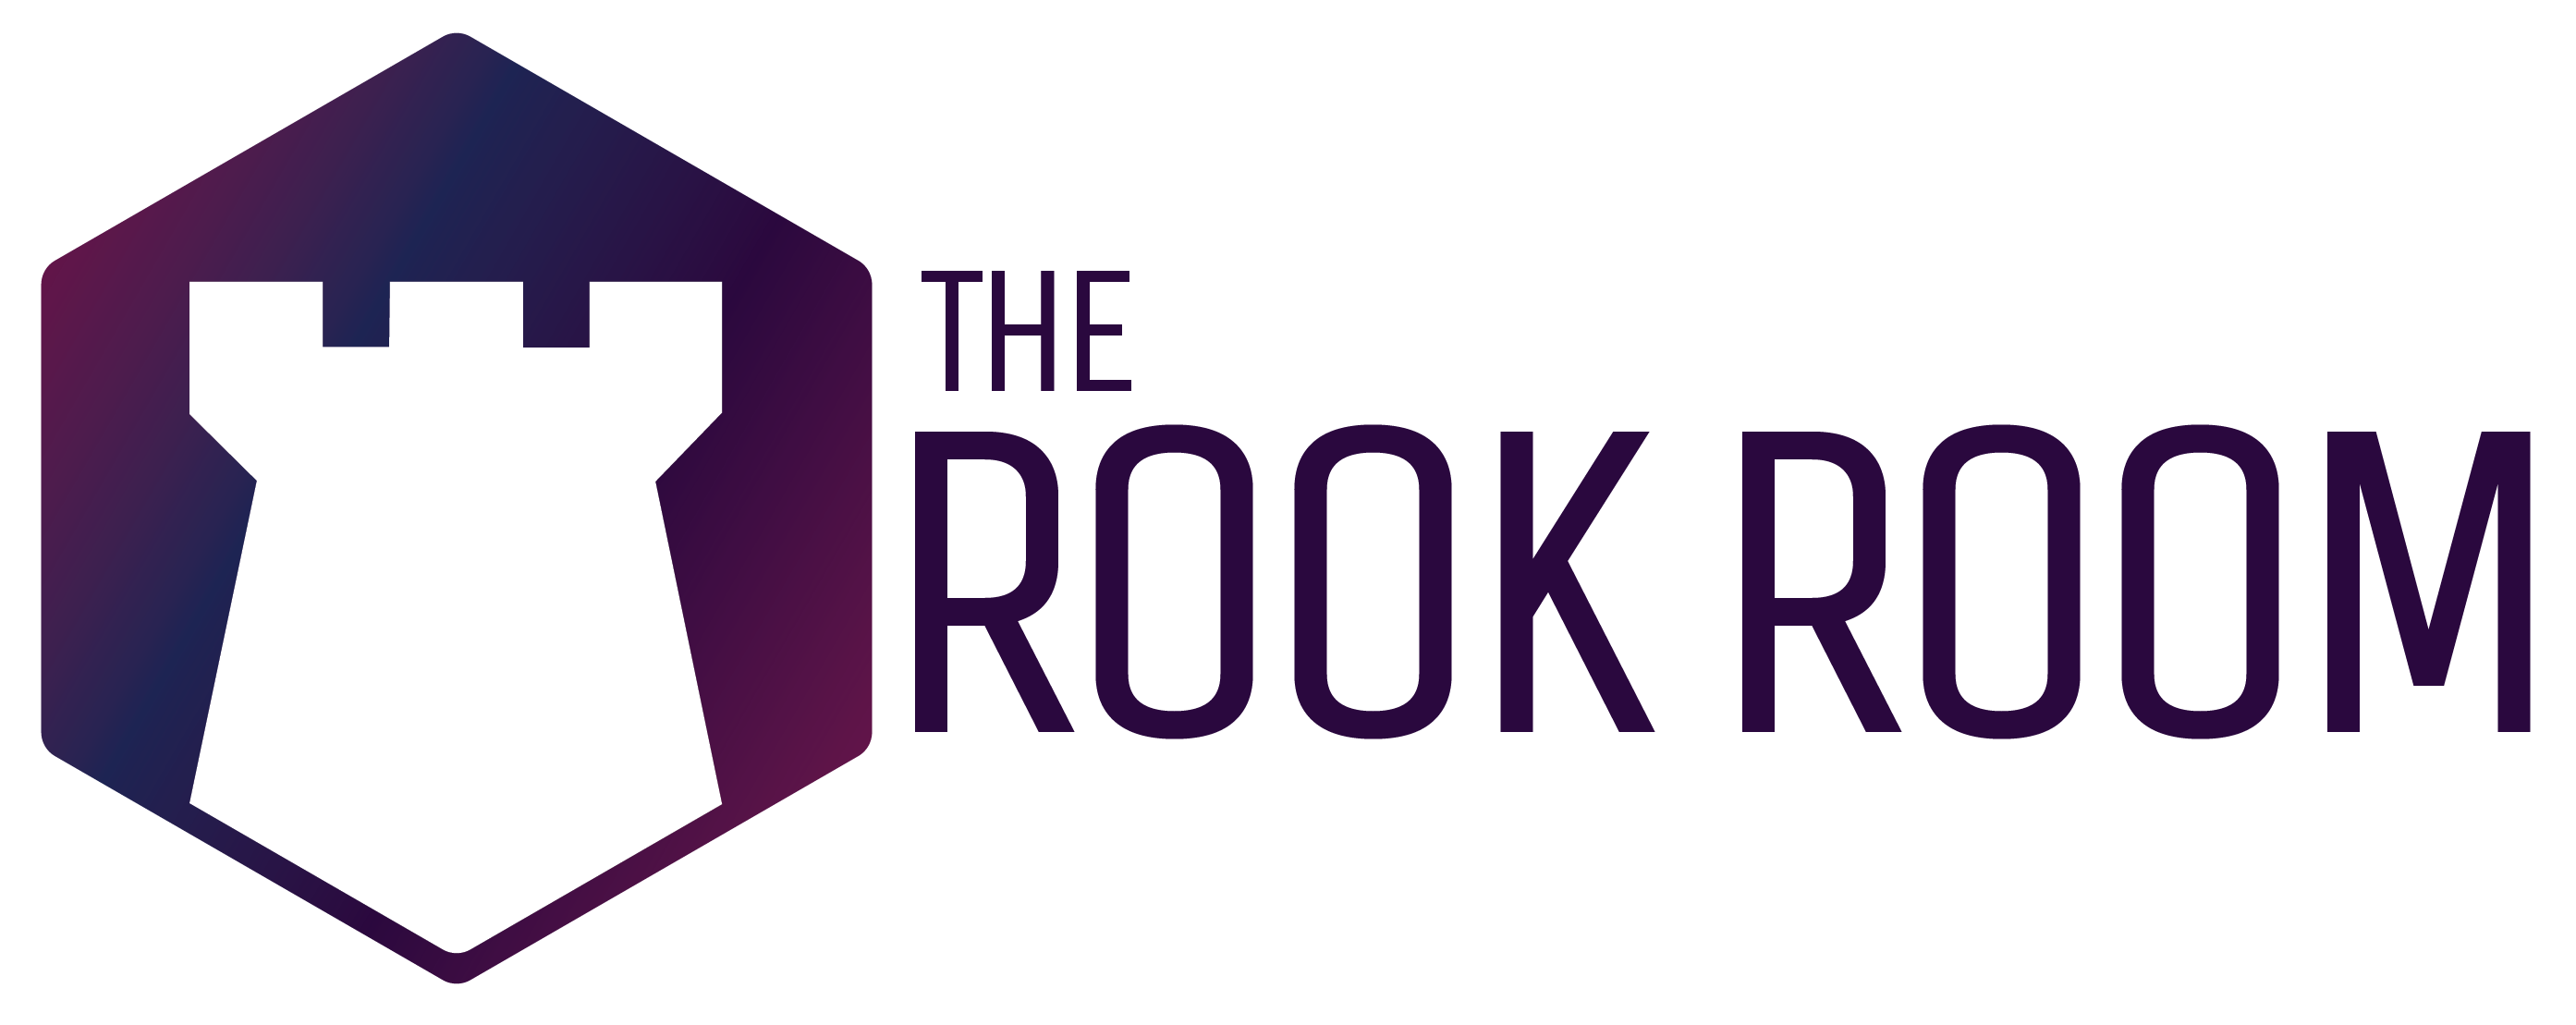 The Rook Room is the Des Moines area’s most exciting pop-up that’s all about games.